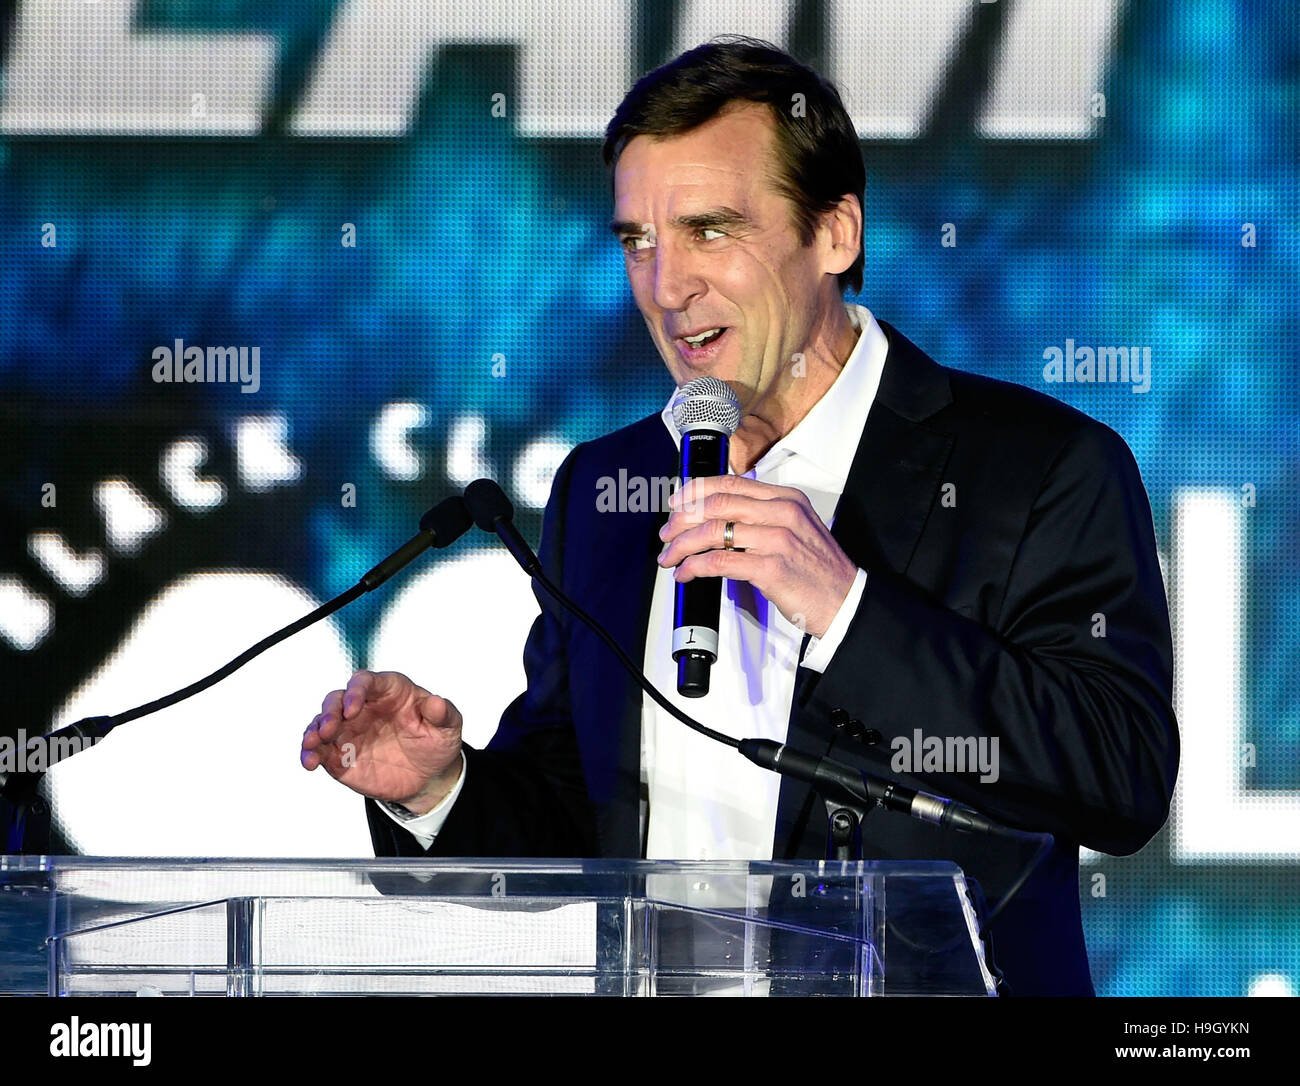 Las Vegas, Nevada, USA. 22nd Nov, 2016. General manager George McPhee speaks before the Vegas Golden Knights is announced as the name for the new Las Vegas NHL franchise at T-Mobile Arena on November 22, 2016 in Las Vegas, Nevada. The team will begin play in the 2017-18 season. © David Becker/ZUMA Wire/Alamy Live News Stock Photo